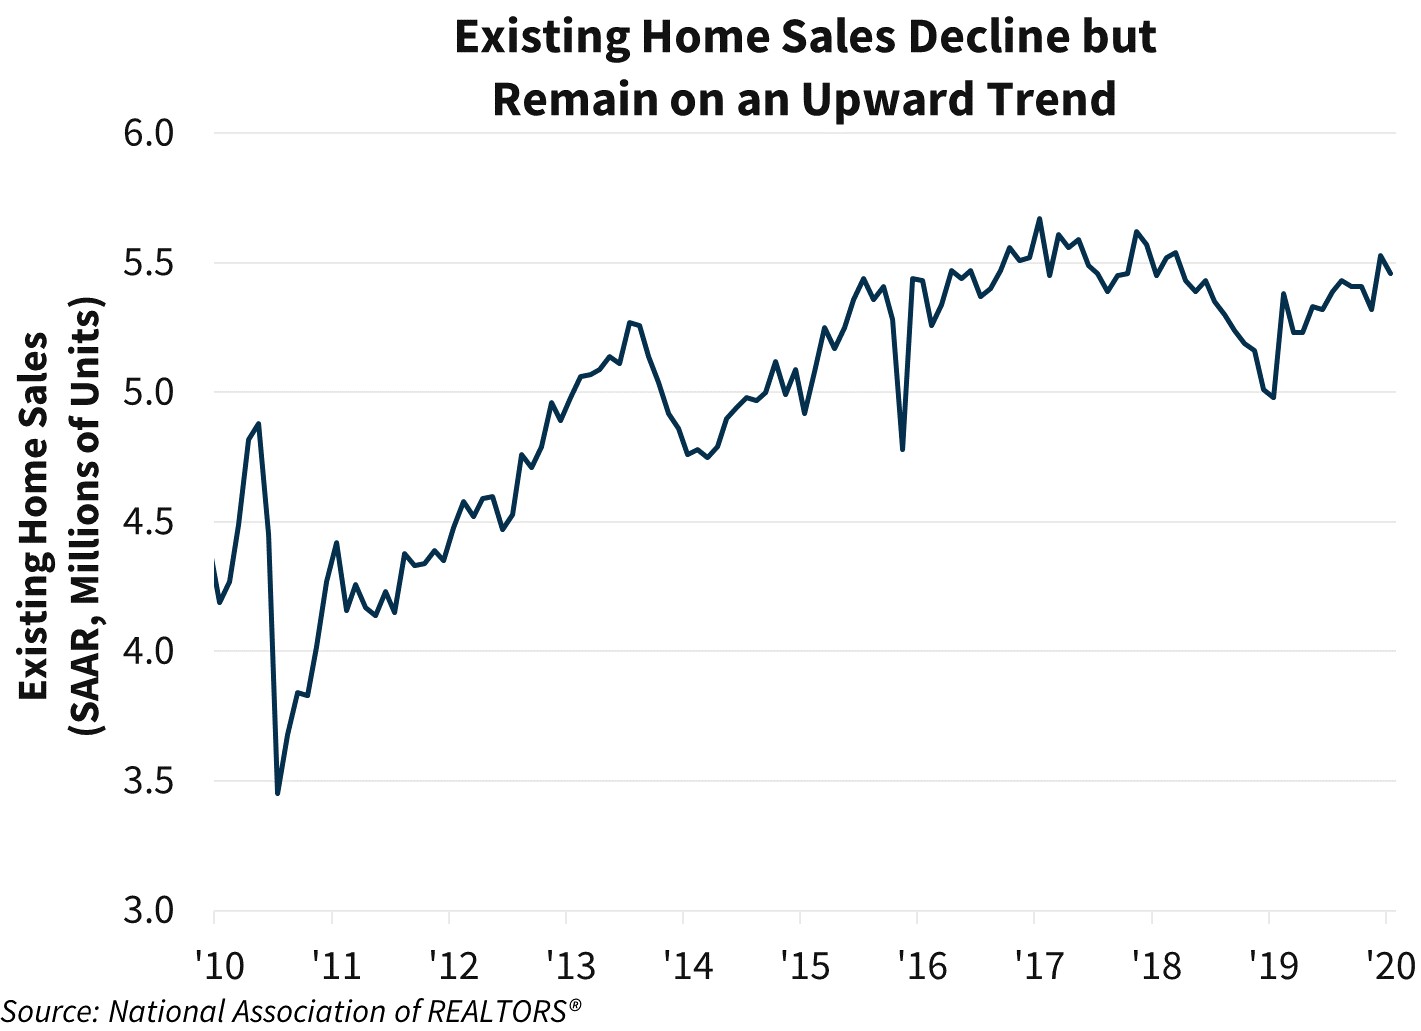 Existing Home Sales Decline but Remain on an Upward Trend